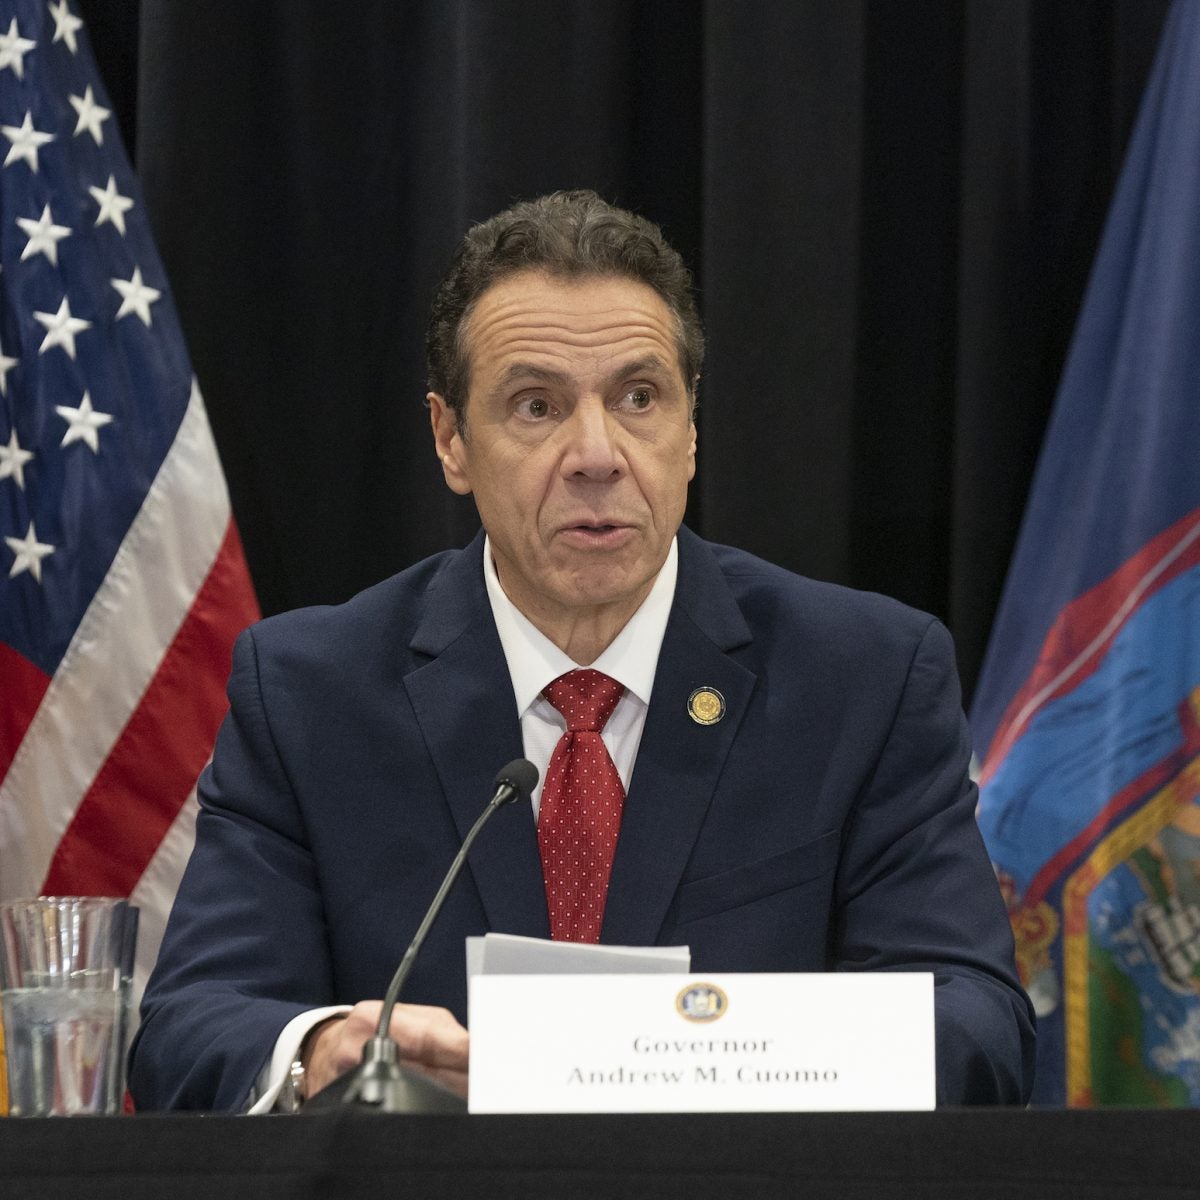 Governor Cuomo Tells NY State Residents That The Pandemic Could Last Up To Nine Months